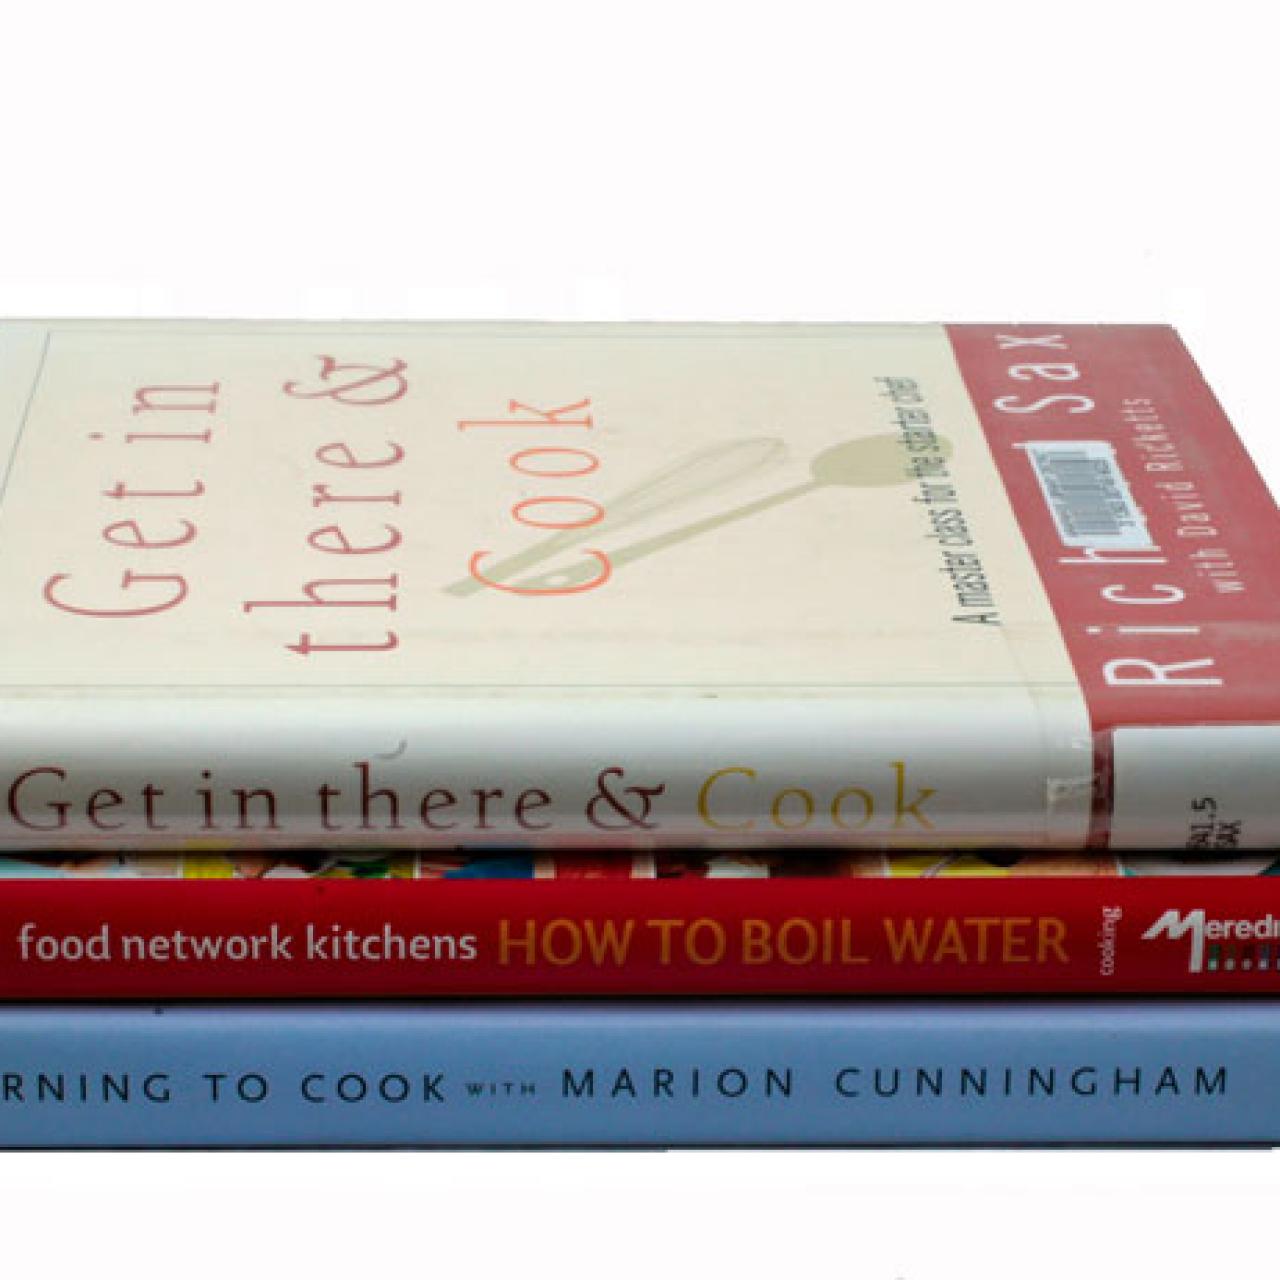 Cookbooks for the Graduating Class, FN Dish - Behind-the-Scenes, Food  Trends, and Best Recipes : Food Network